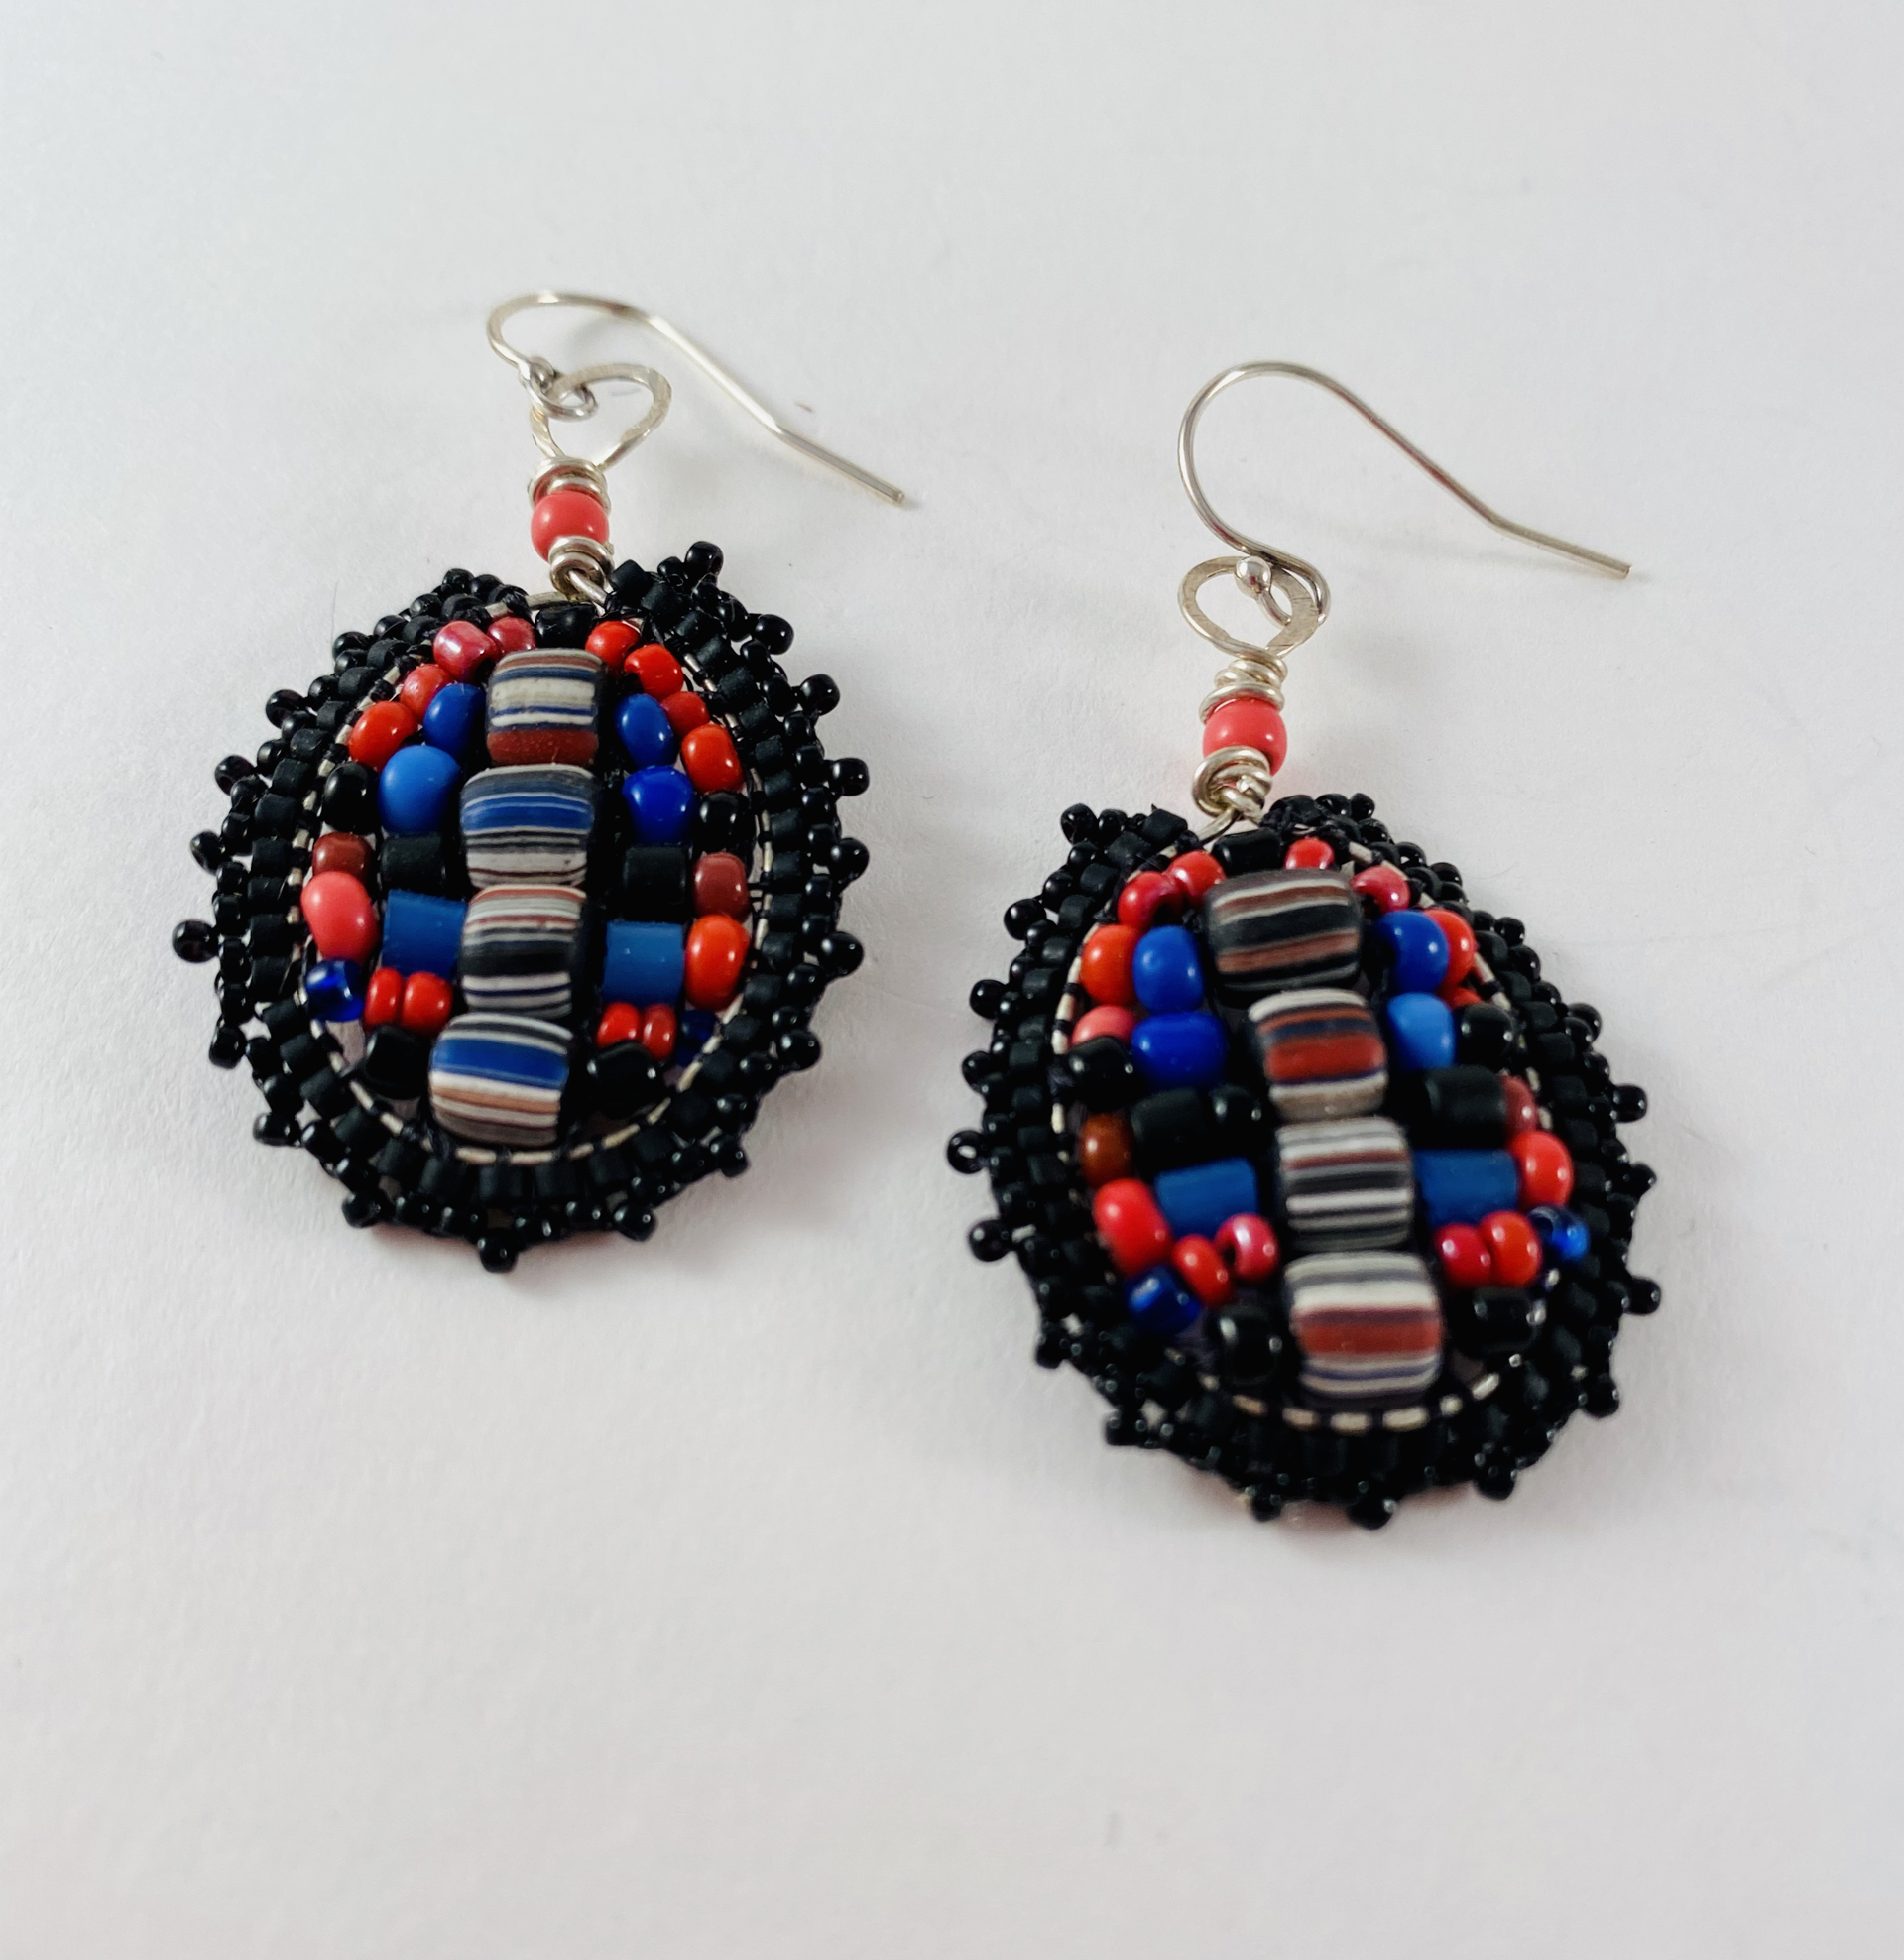 African Trade Bead Earrings by Barbara Duimstra